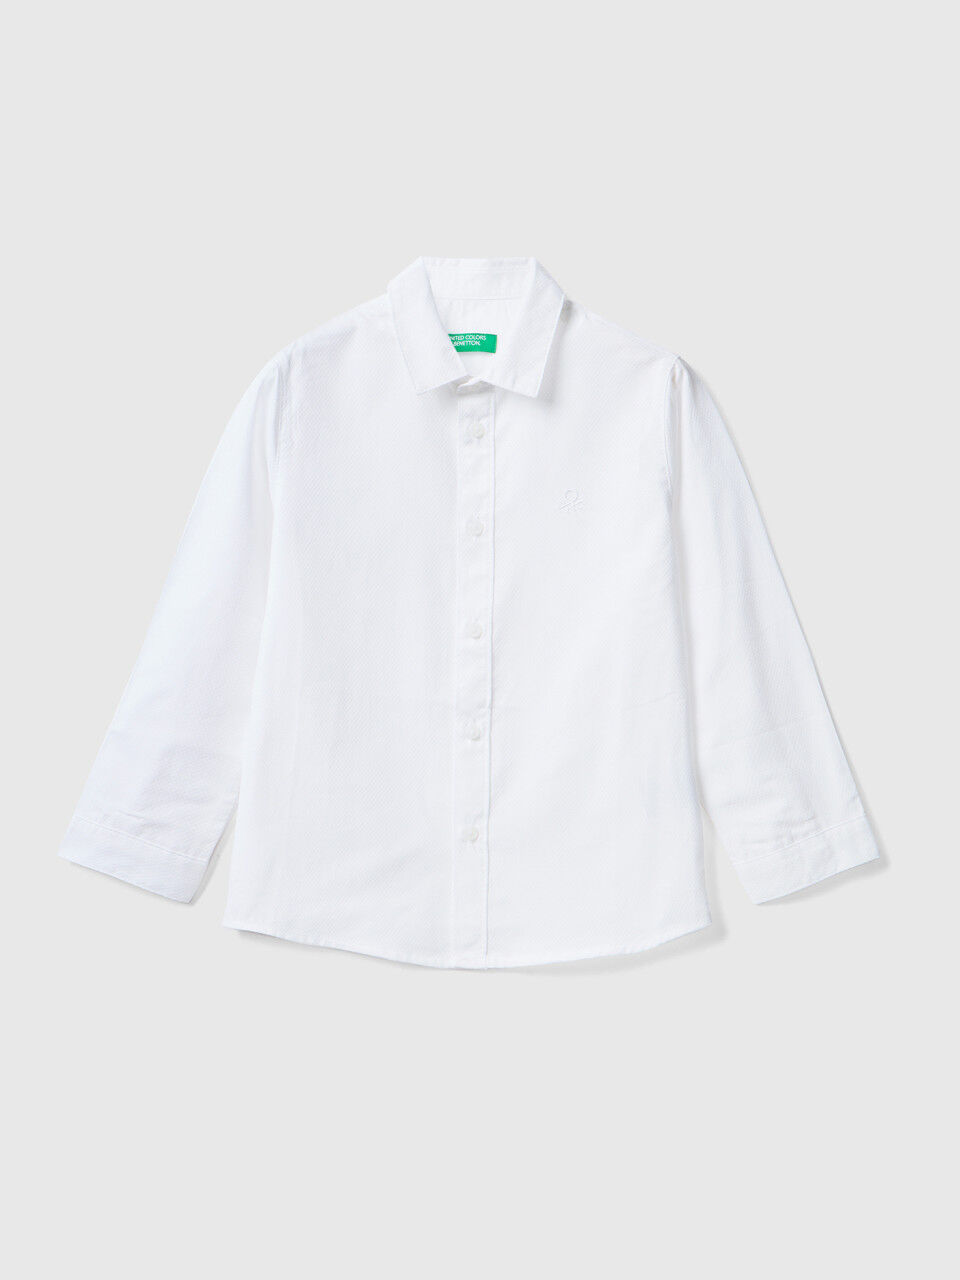 Classic shirt in pure cotton